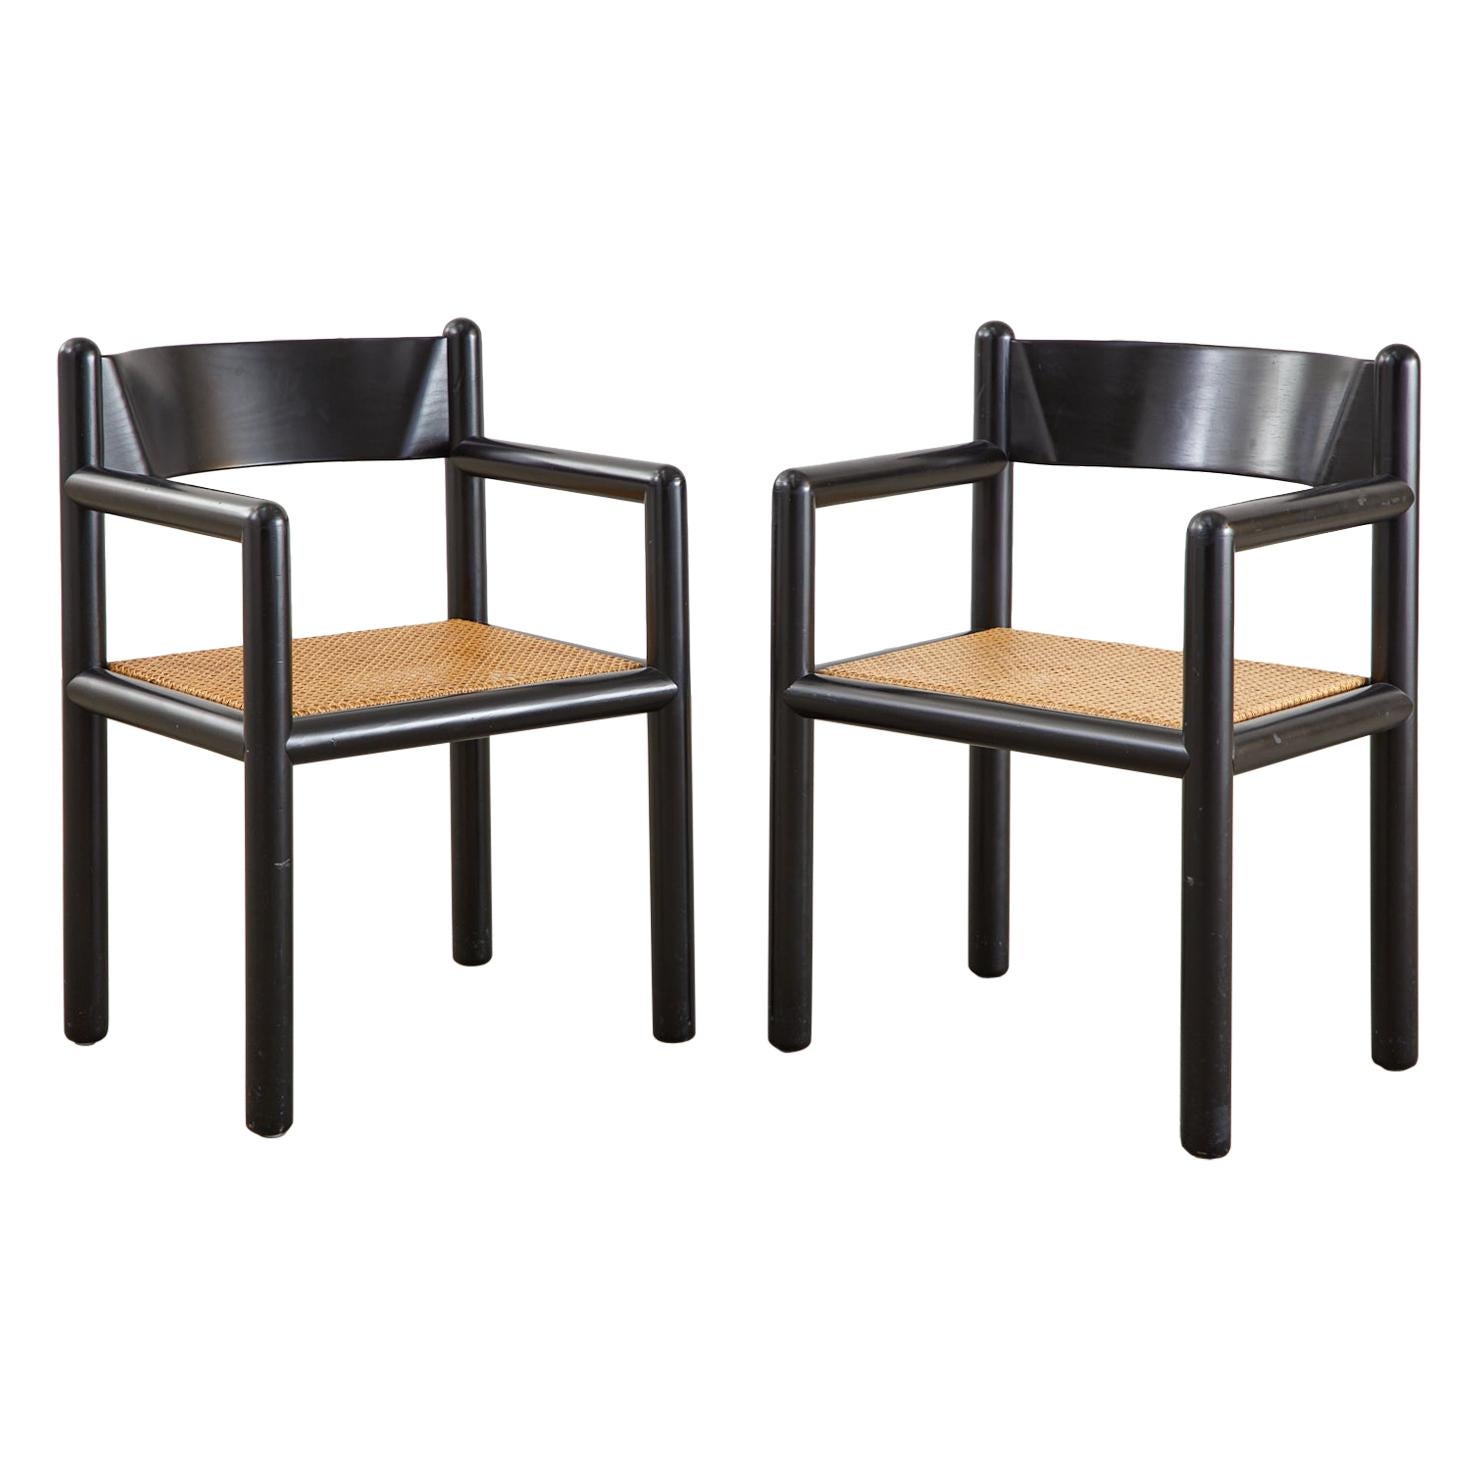 Pair of Massimo and Lella Vignelli Caned Acorn Armchairs